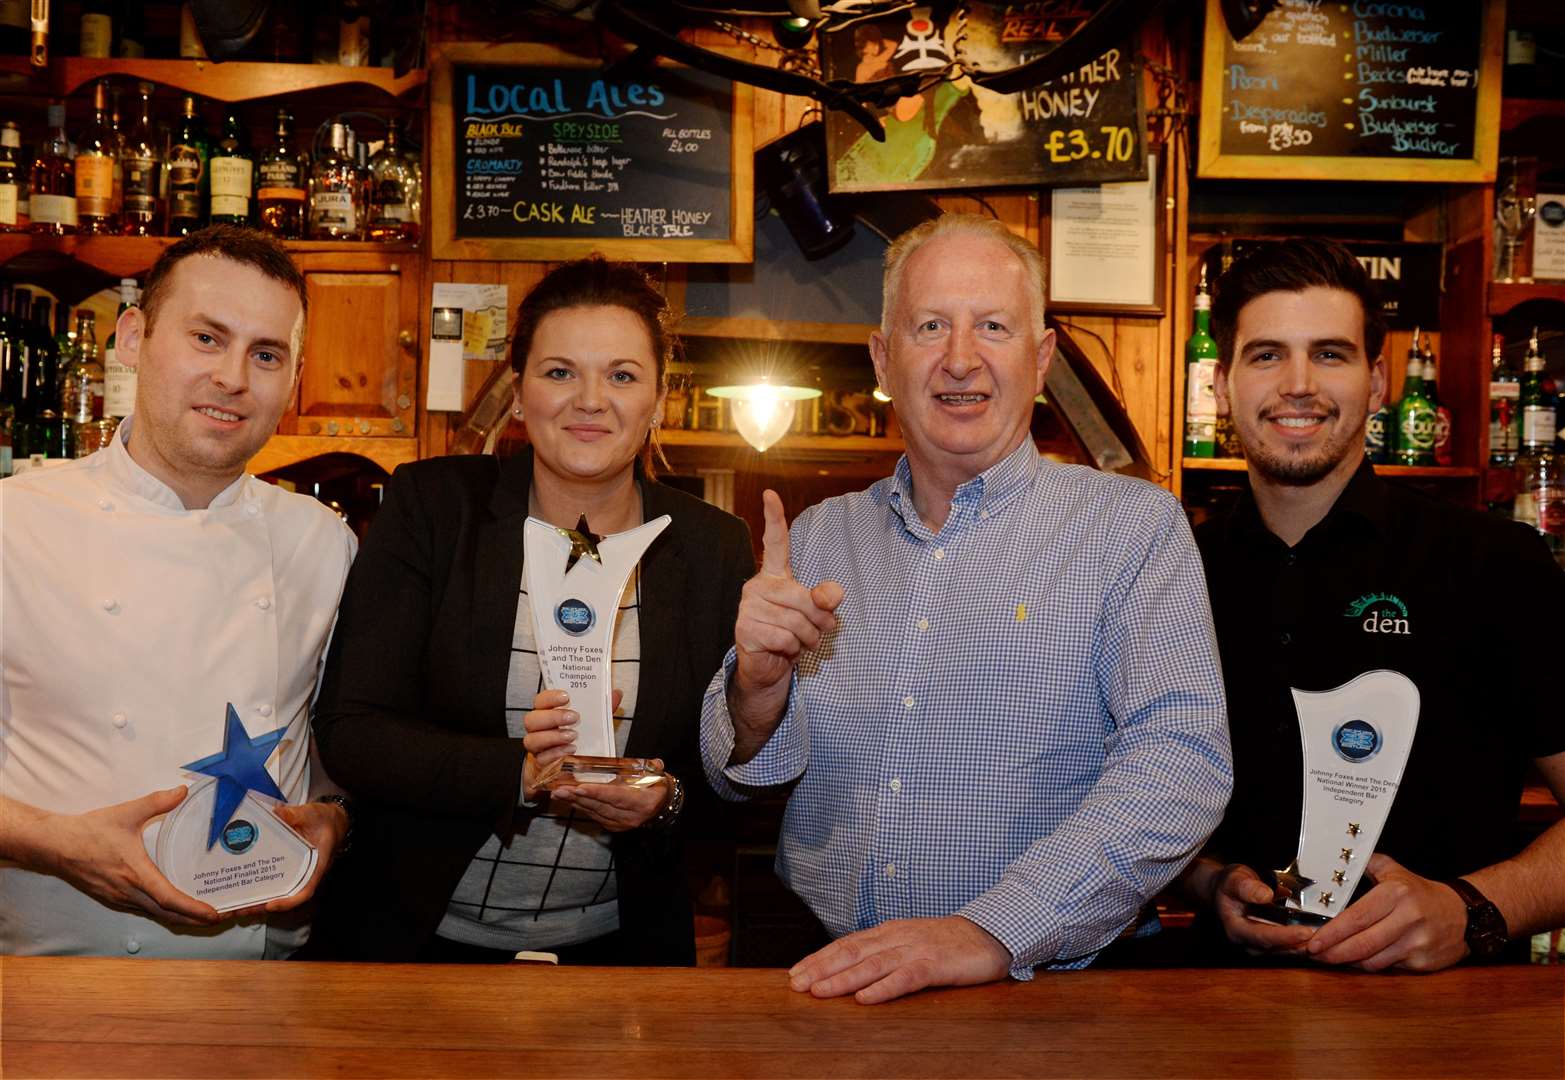 Don Lawson is pictured with some of the team after winning the Best National Bar and Best Independent Bar awards at the Best Bar None National Awards Scotland in Edinburgh back in 2015. Pictured are (from left) Paul Nisbet, Tina MacDonald, Don Lawson and Ruairidh Ross.